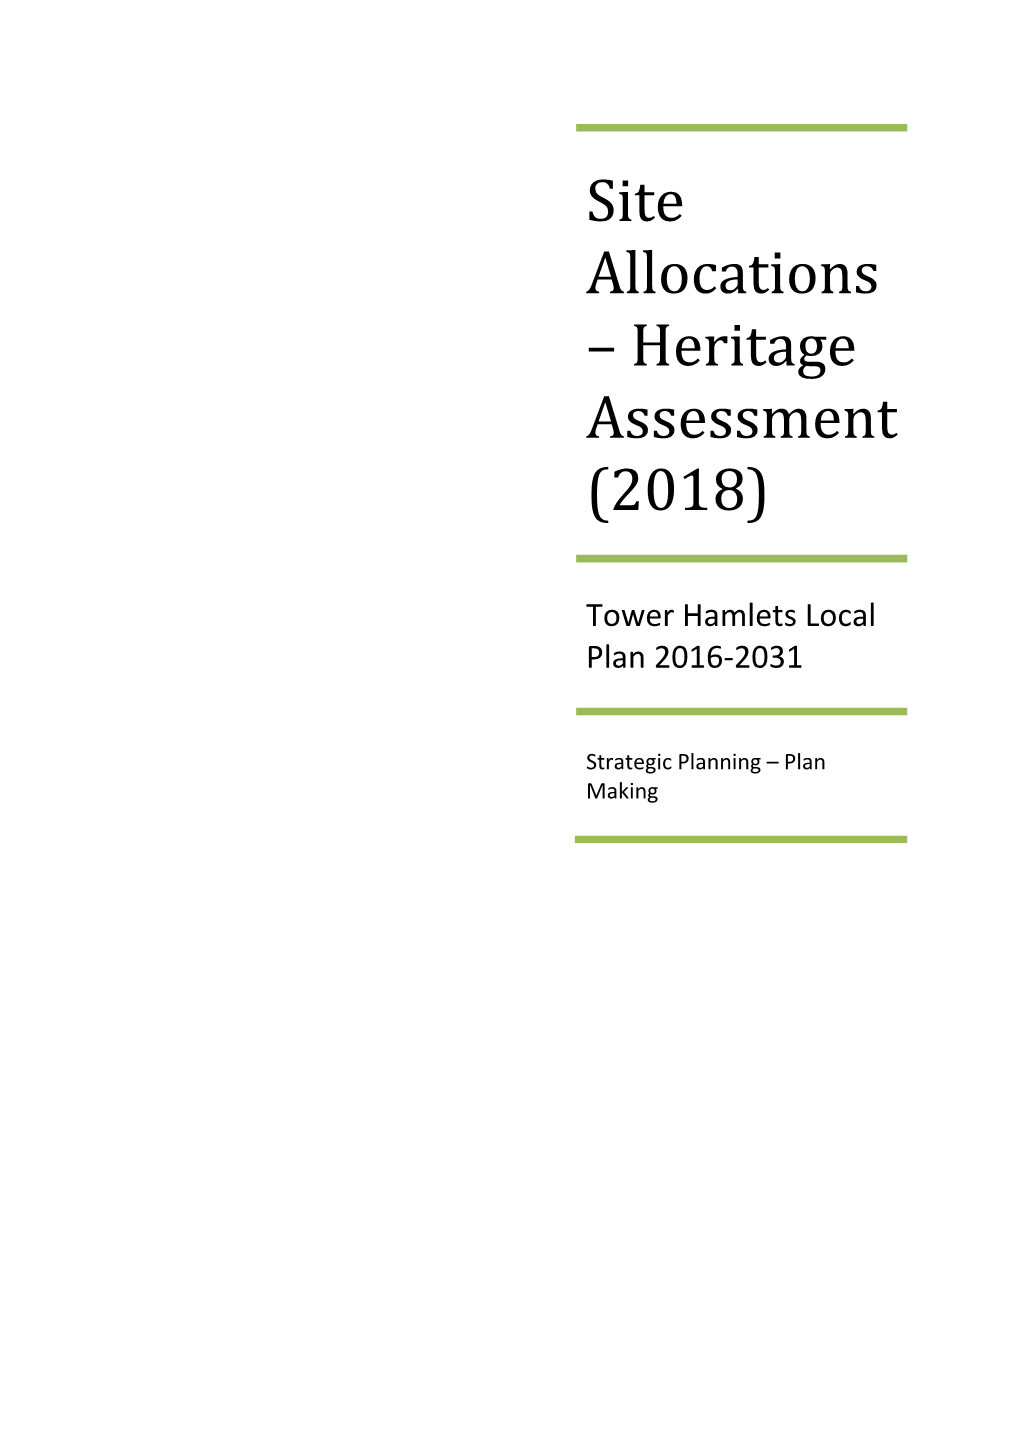 Site Allocations – Heritage Assessment (2018)